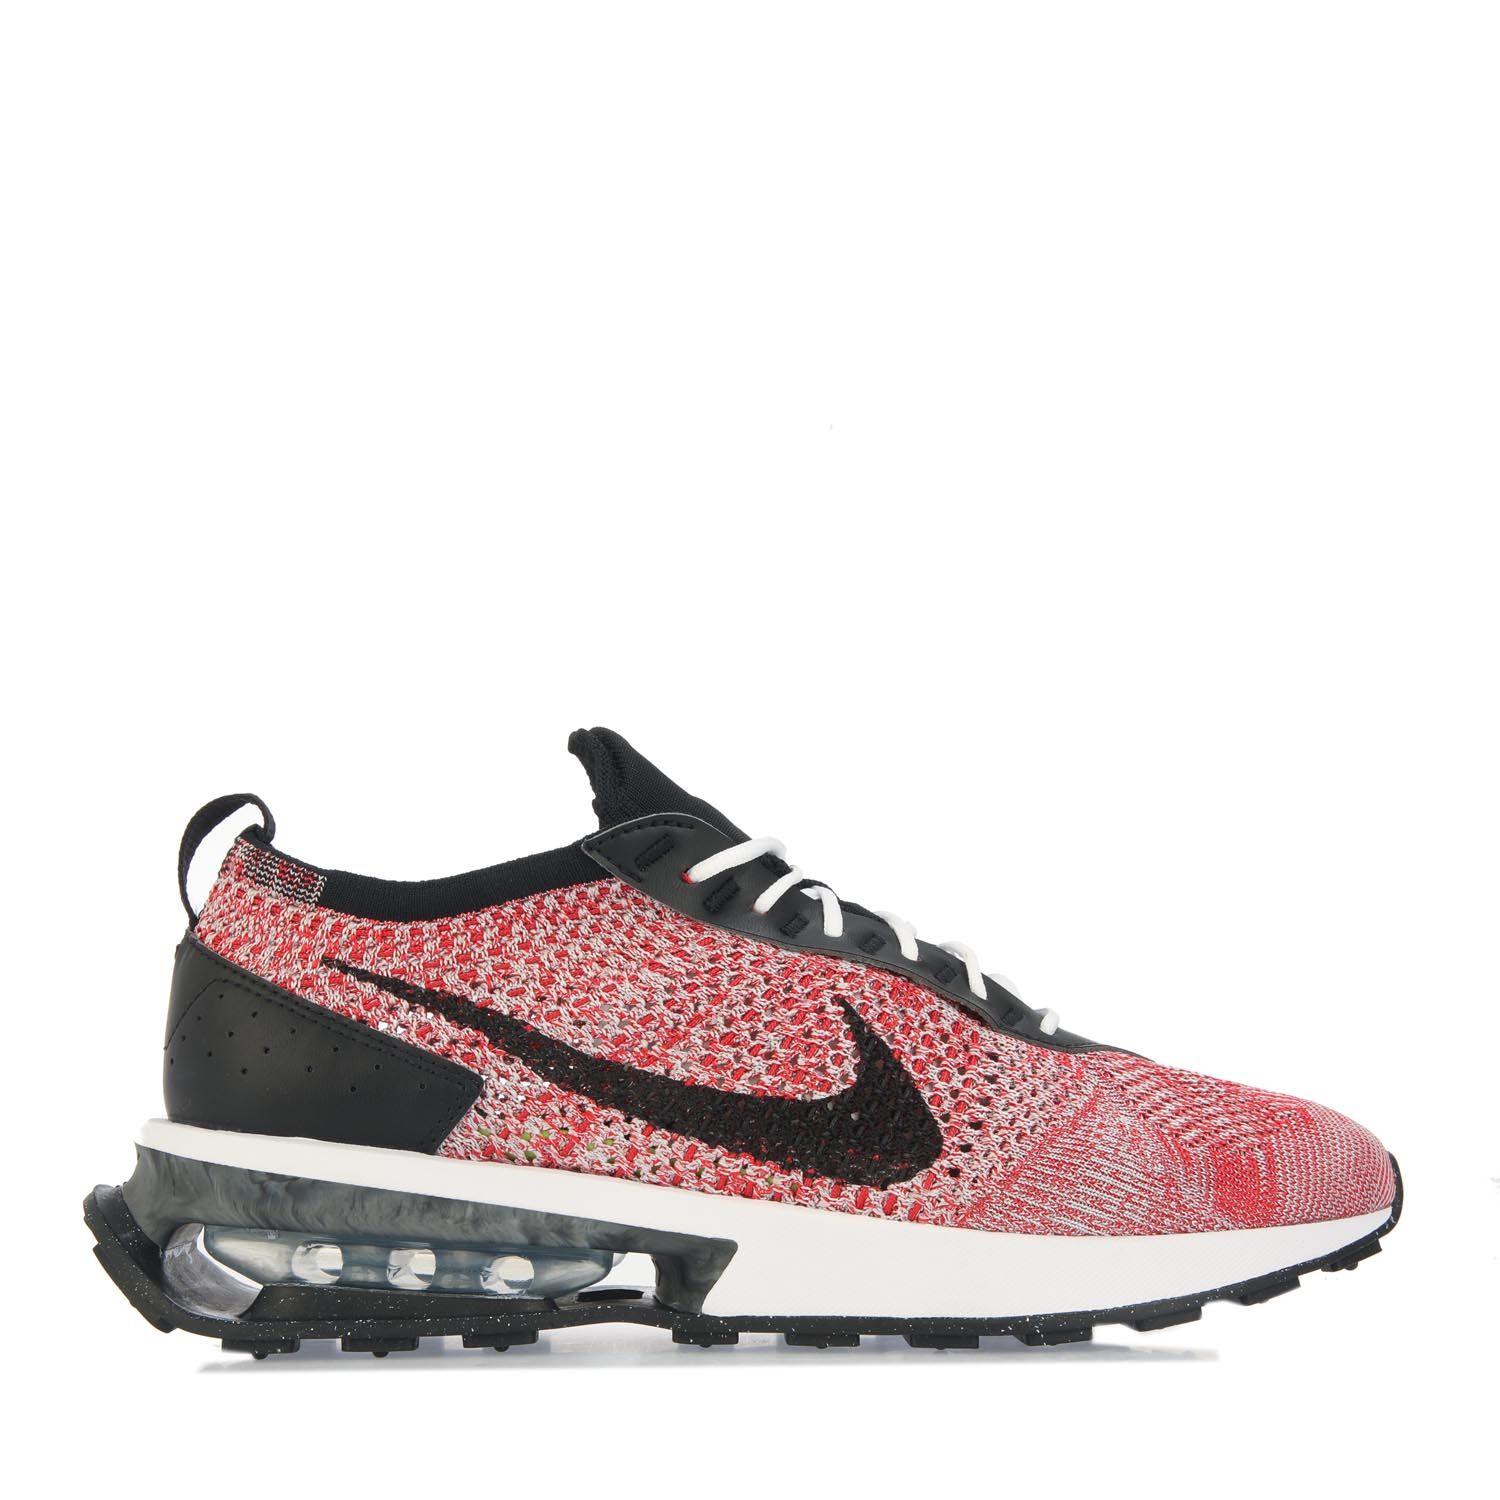 Nike Mens Air Max Flyknit Racer Trainers in White red black